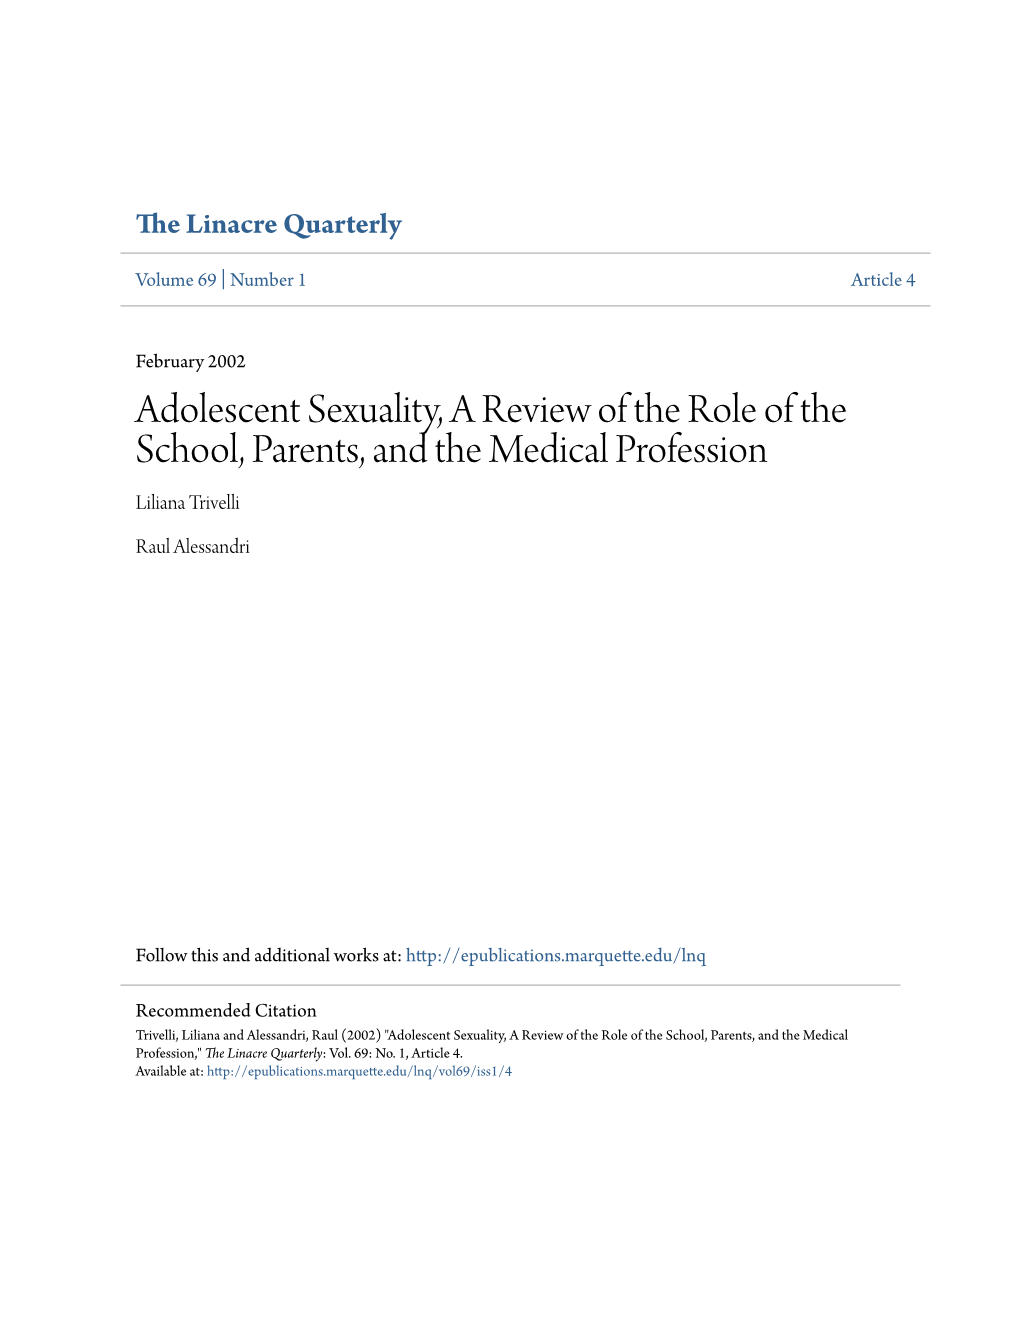 Adolescent Sexuality, a Review of the Role of the School, Parents, and the Medical Profession Liliana Trivelli